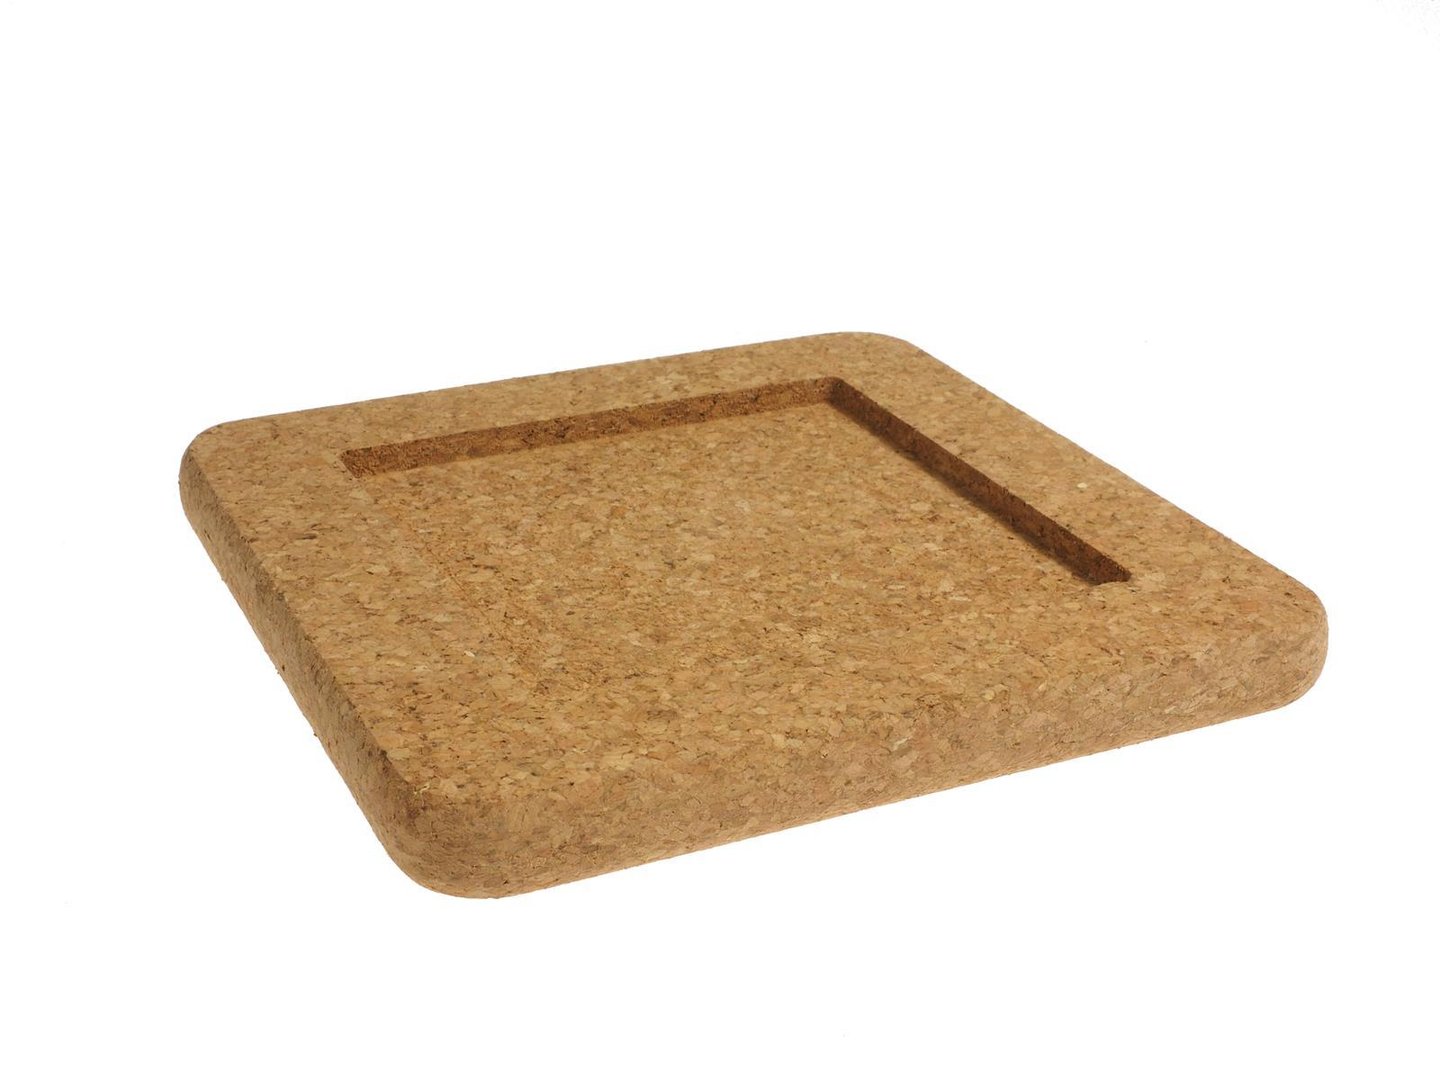 7760 150 10 Coaster With Cut-out Square 2